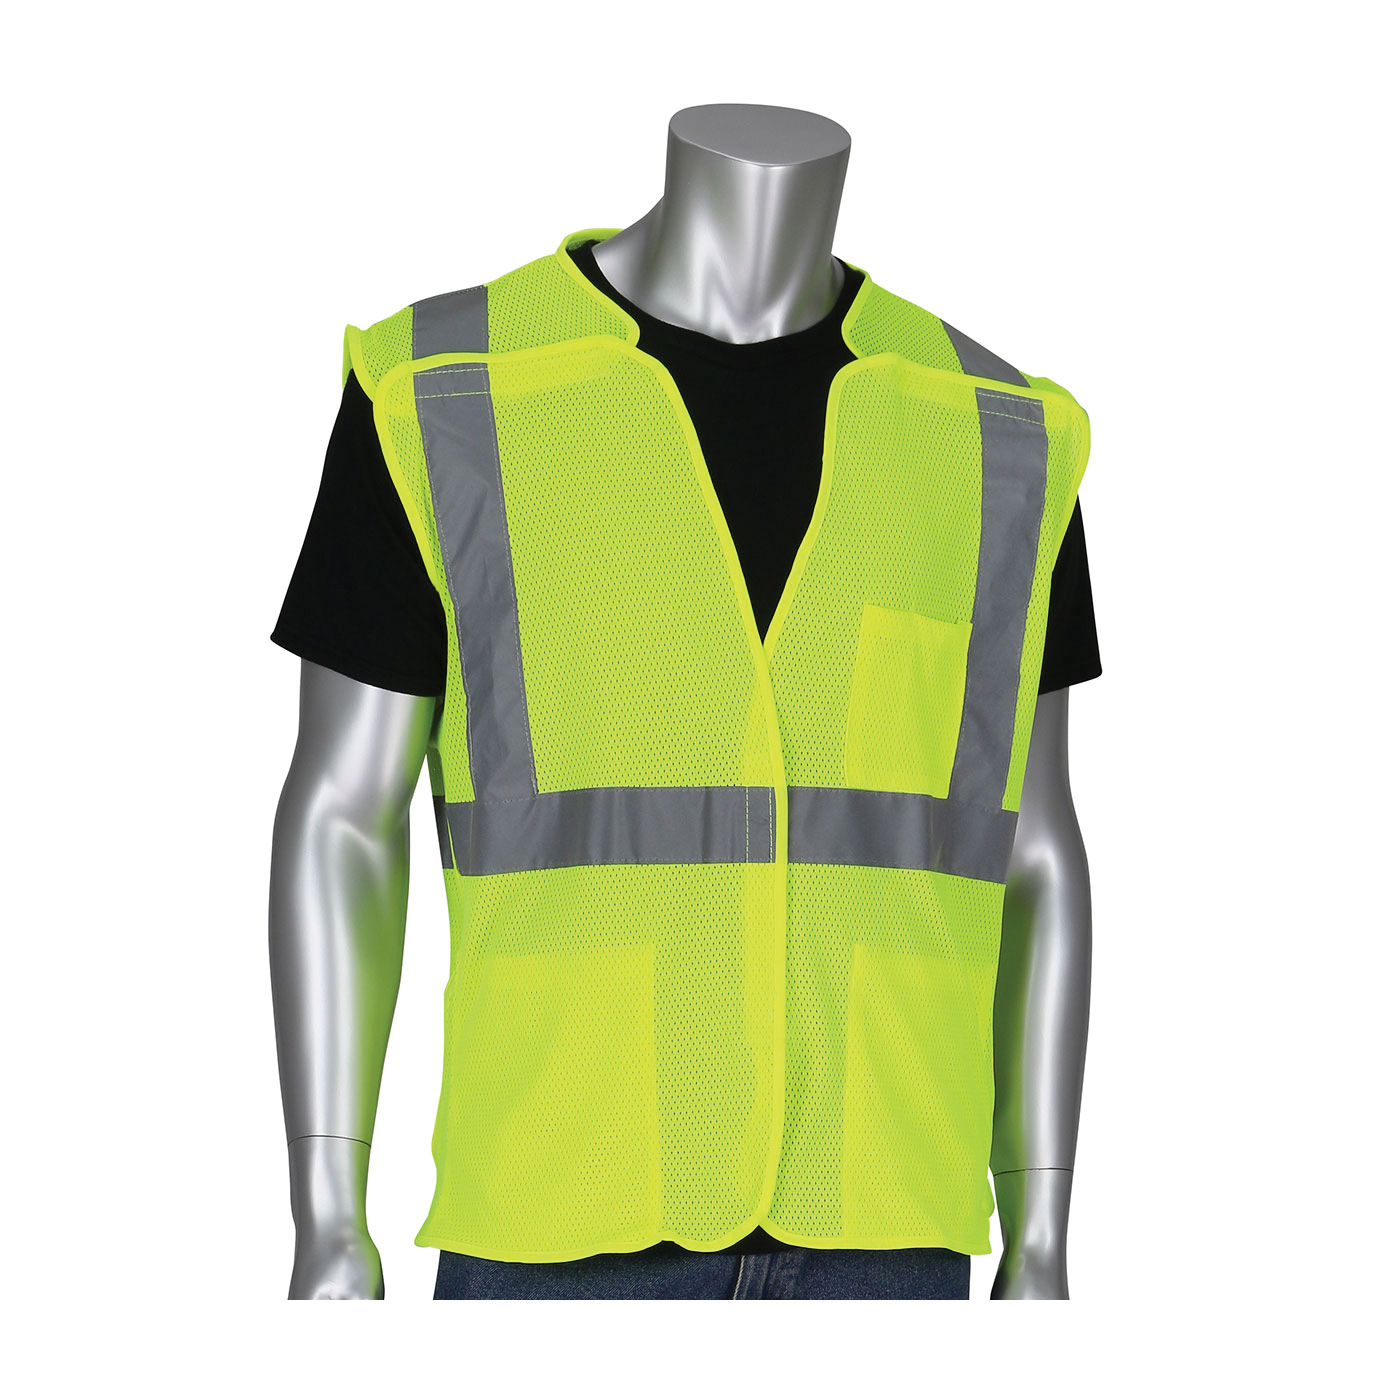 PIP® 302-5PMVLY-L Safety Vest, L, Hi-Viz Lime Yellow, Polyester, Hook and Loop Closure, 3 Pockets, ANSI Class: Class 2, Specifications Met: ANSI 107 Type R